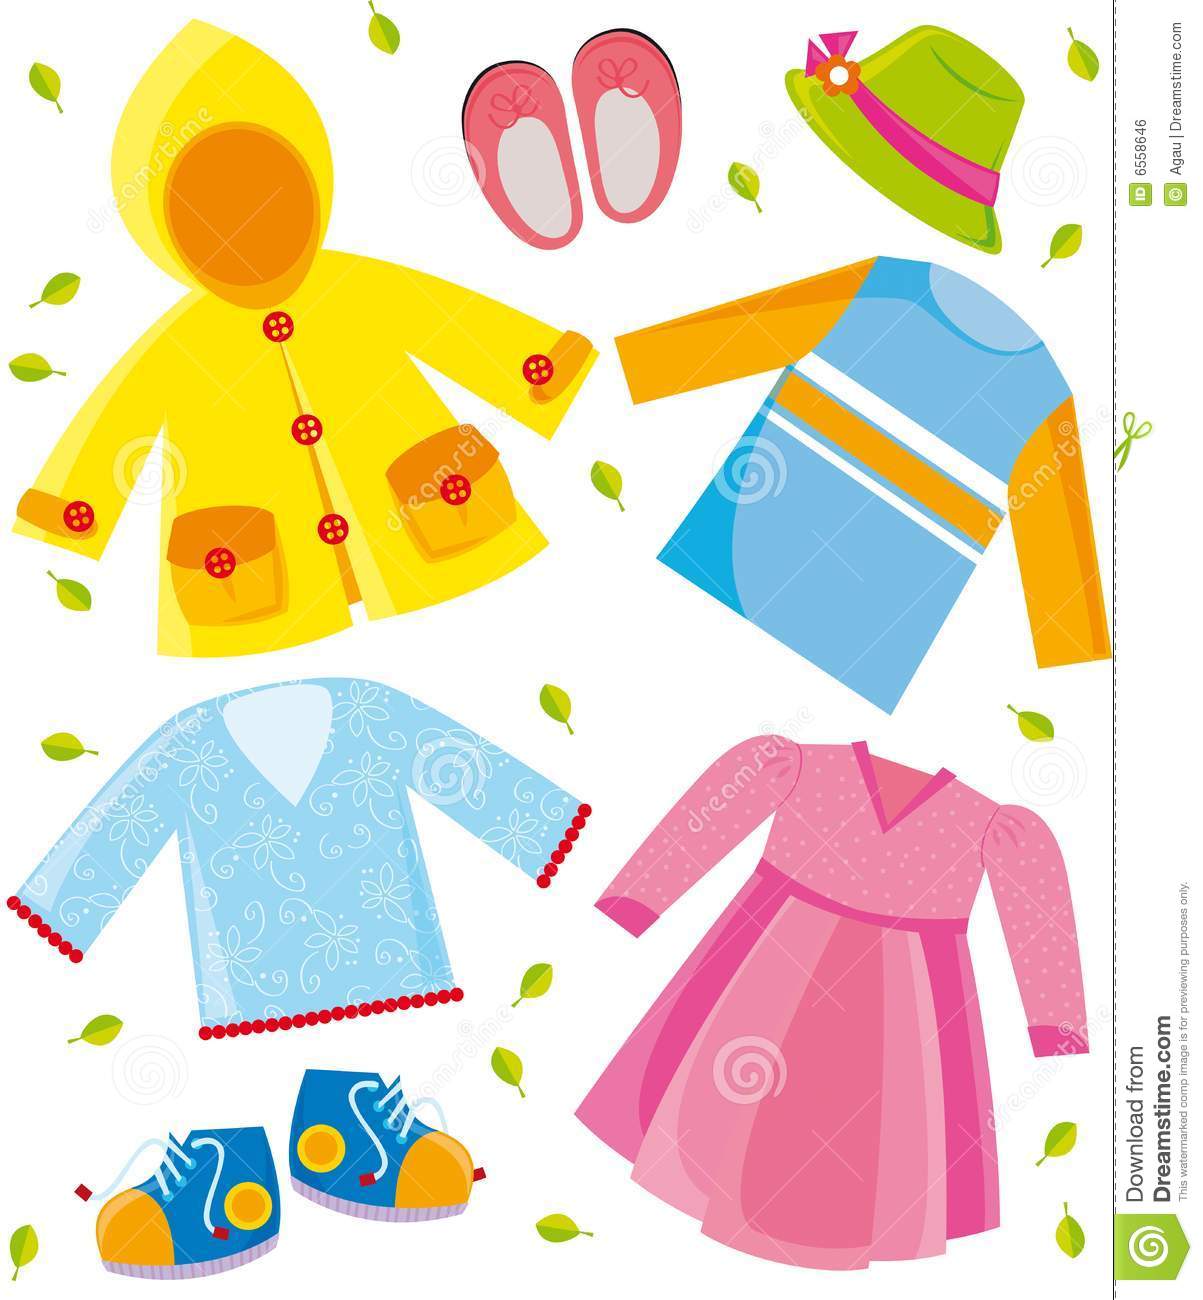 Spring Clothing Clipart Images   Pictures   Becuo